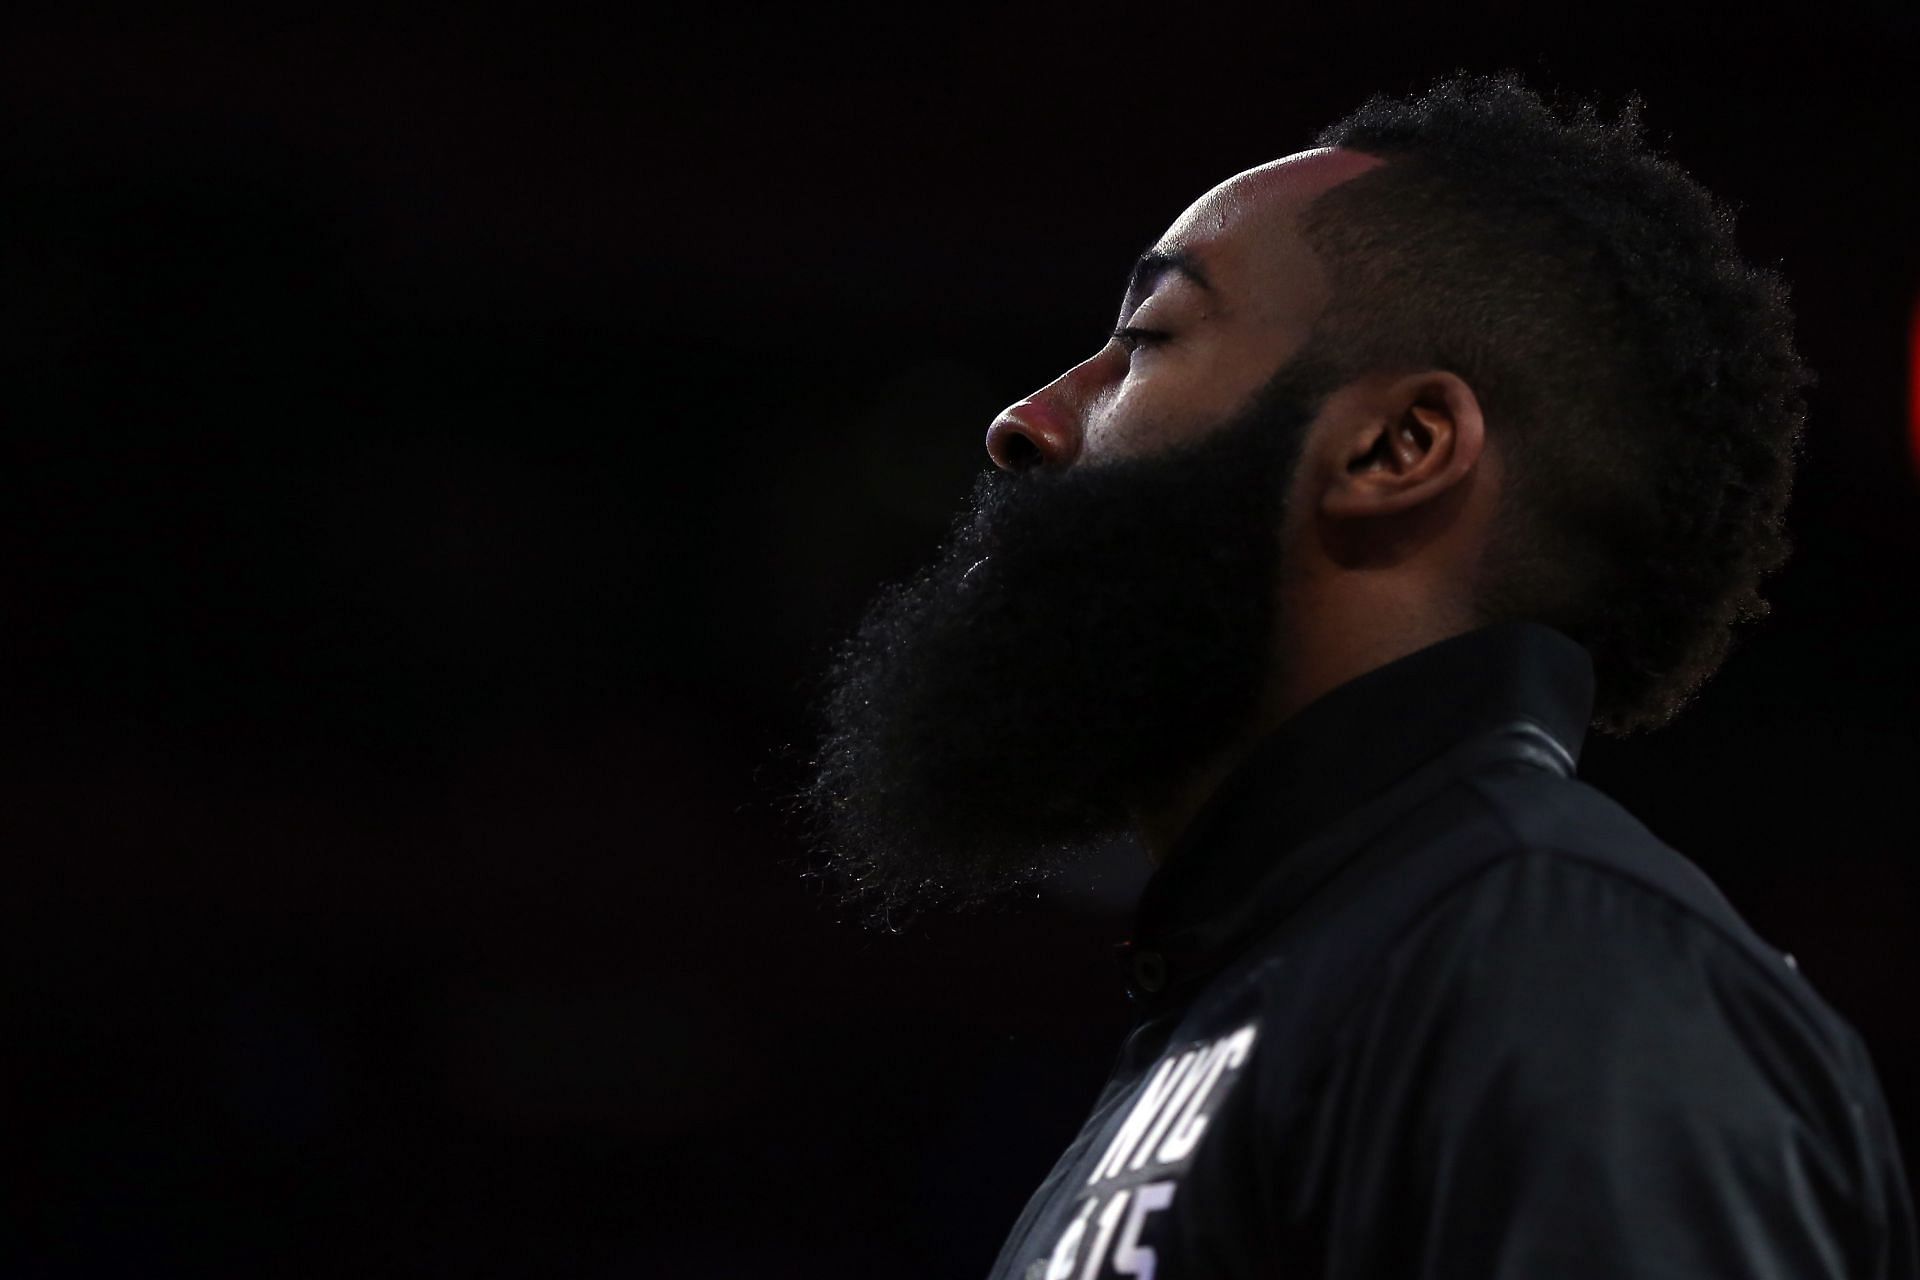 James Harden of the Houston Rockets and the Western Conference looks on during the 2015 NBA All-Star Game at Madison Square Garden.